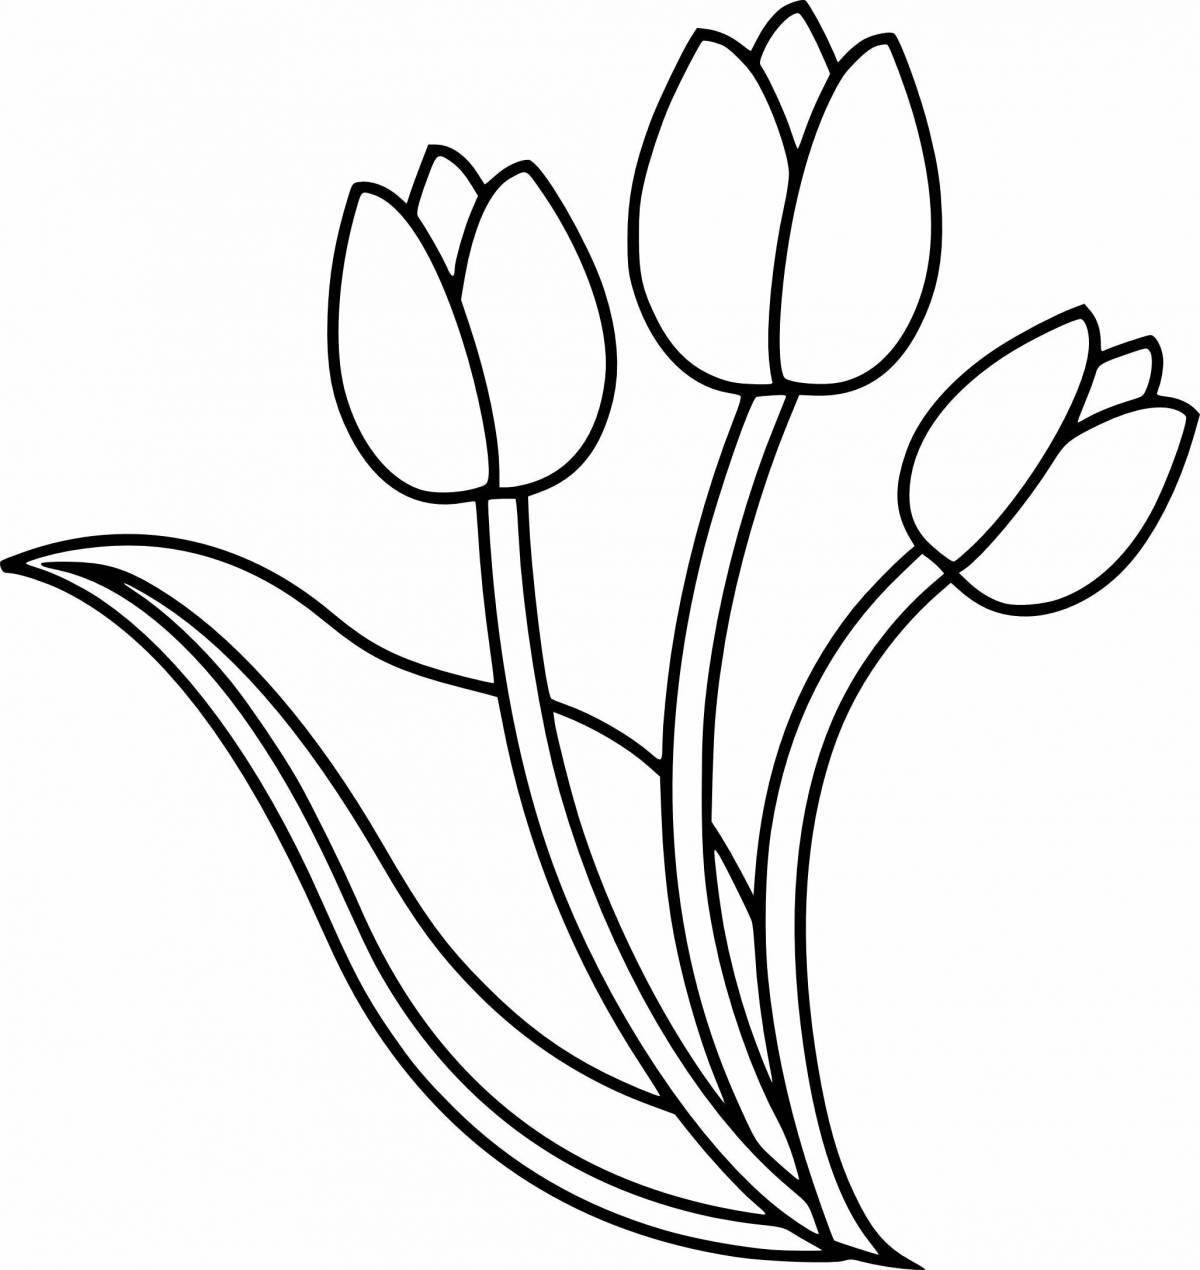 Fantastic tulip coloring page for kids